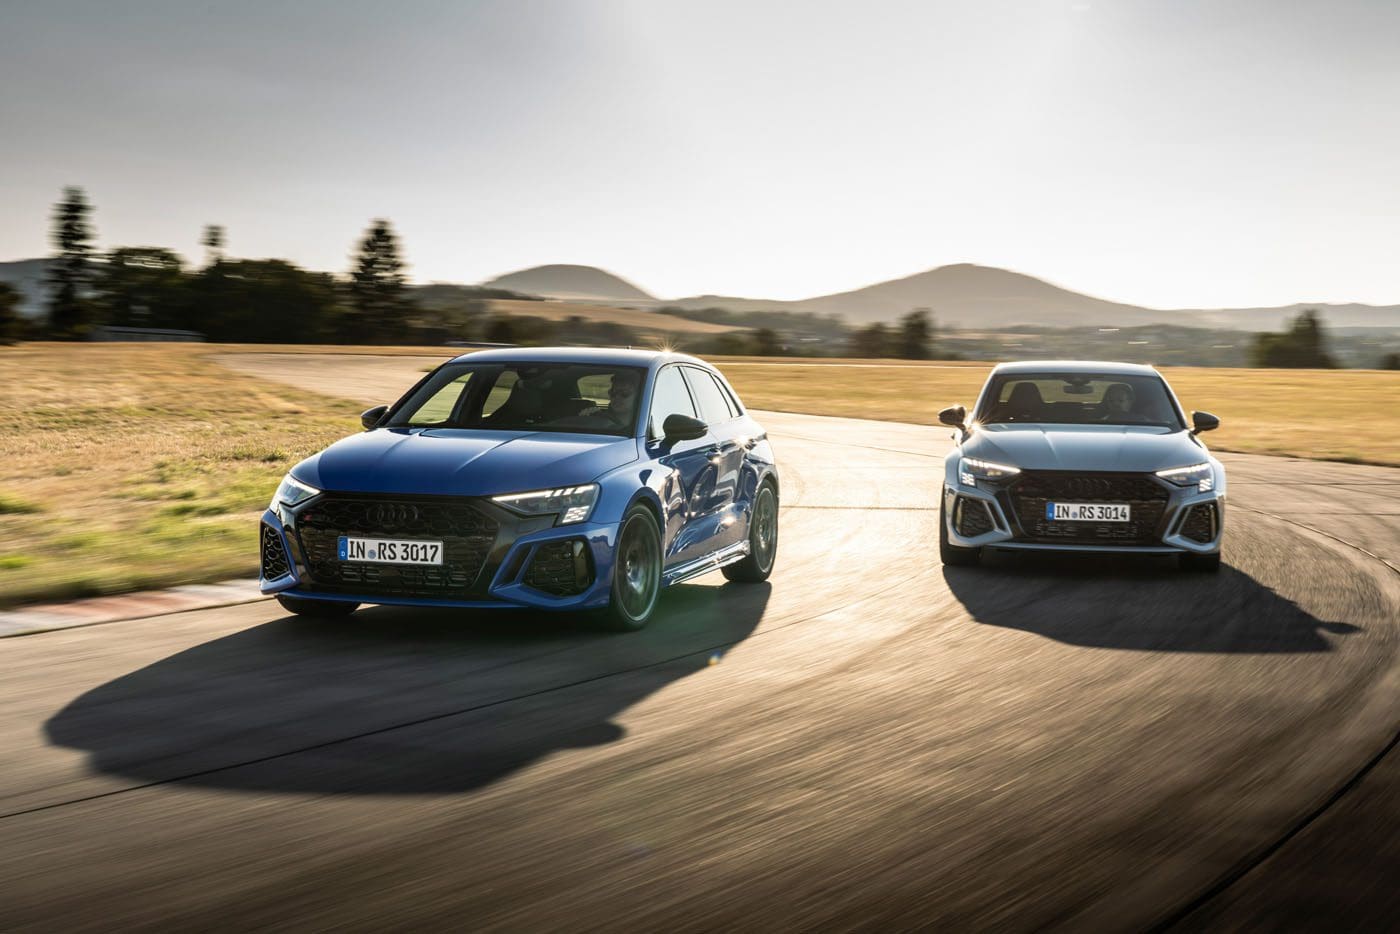 6 secrets you'd want to know about Audi's new RS 3 Sportback and